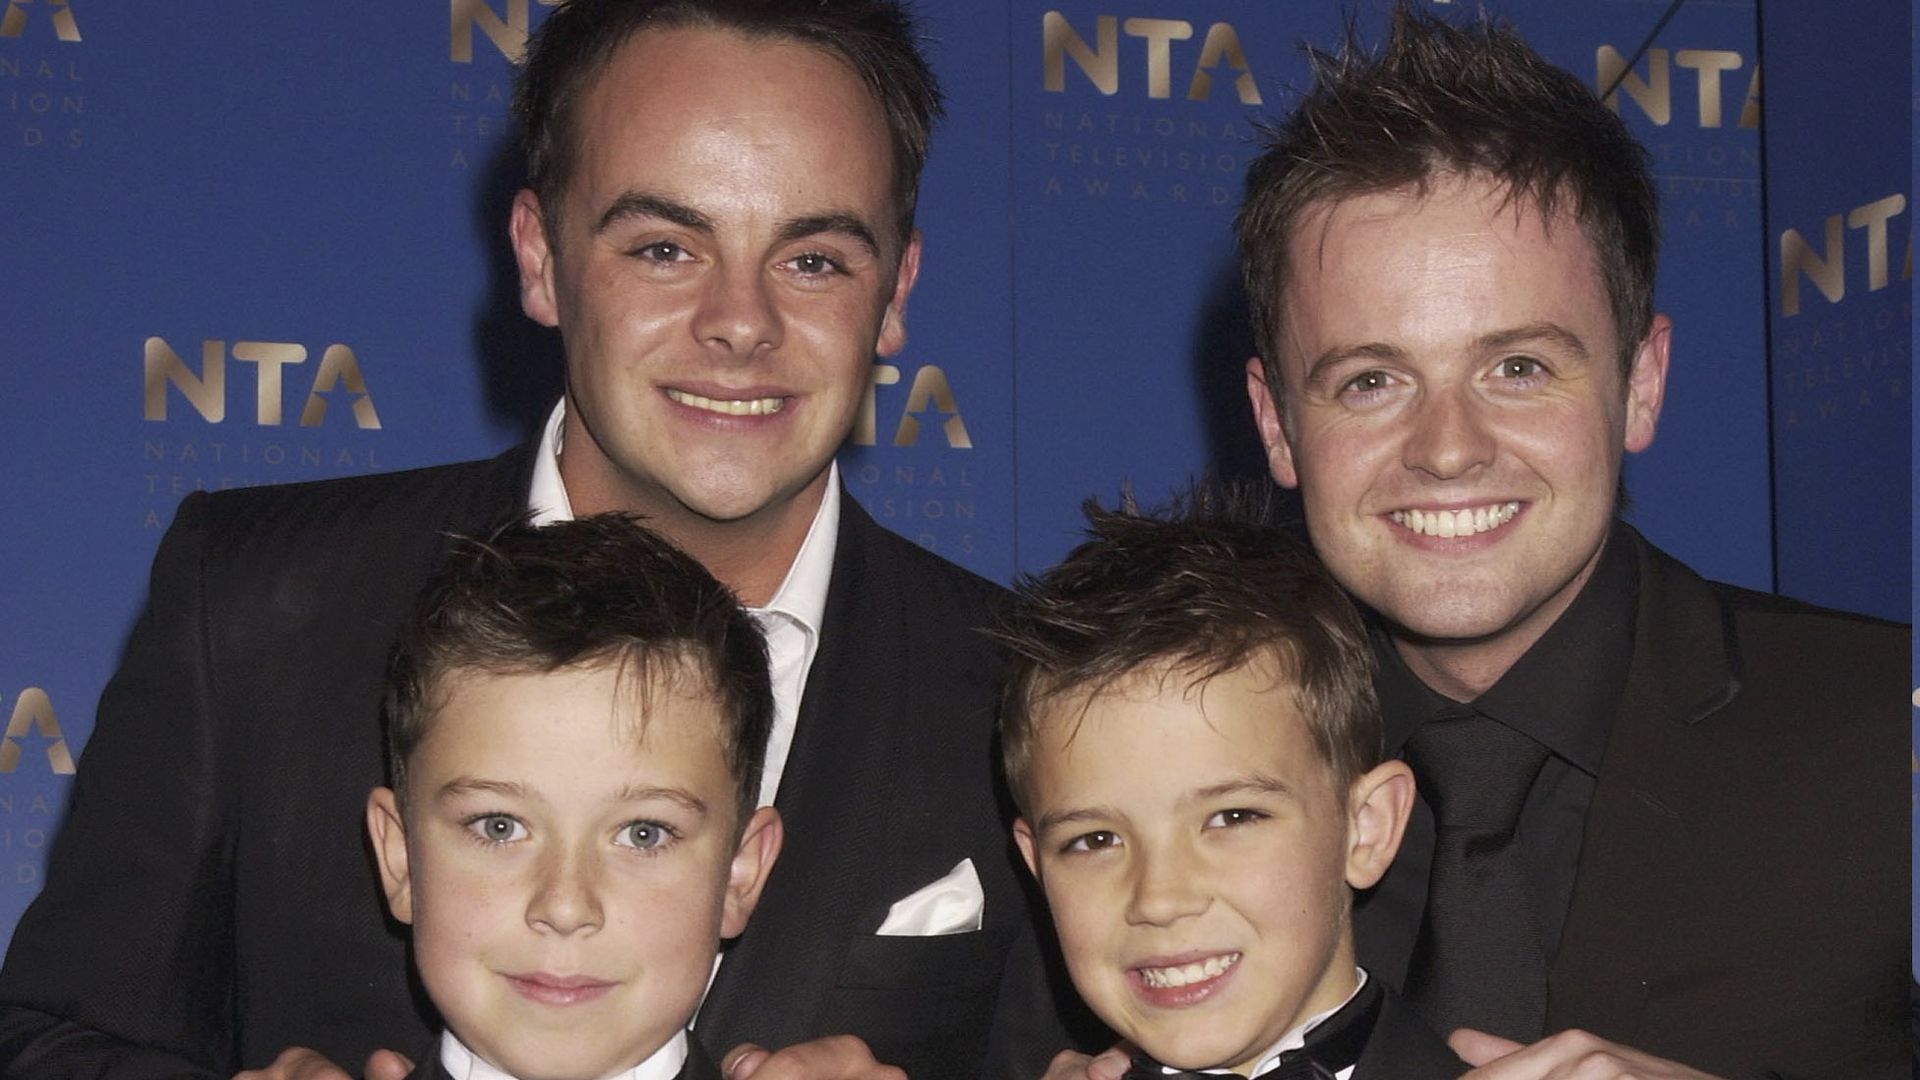 Ant McPartlin, Declan Donnelly, Little Ant and Little Dec attend the 2003 National TV Awards